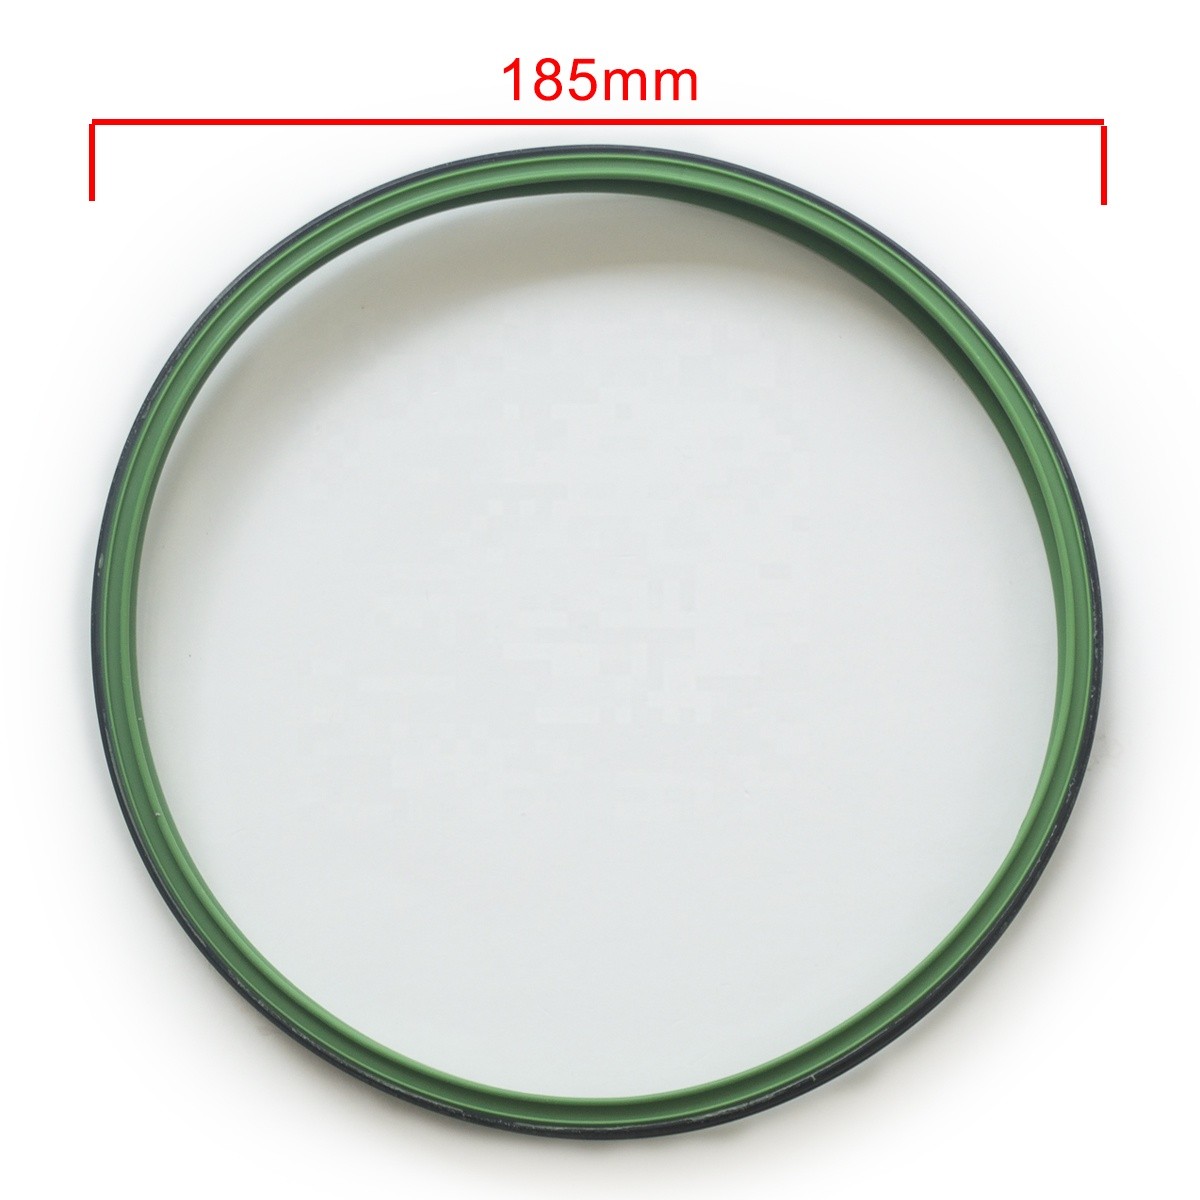 Replacement Spare Parts Blender of VORWERK Bimby Thermomix TM31 Cooking Food Grade Lid Pot Cover Seal Ring Gasket Part Accessory